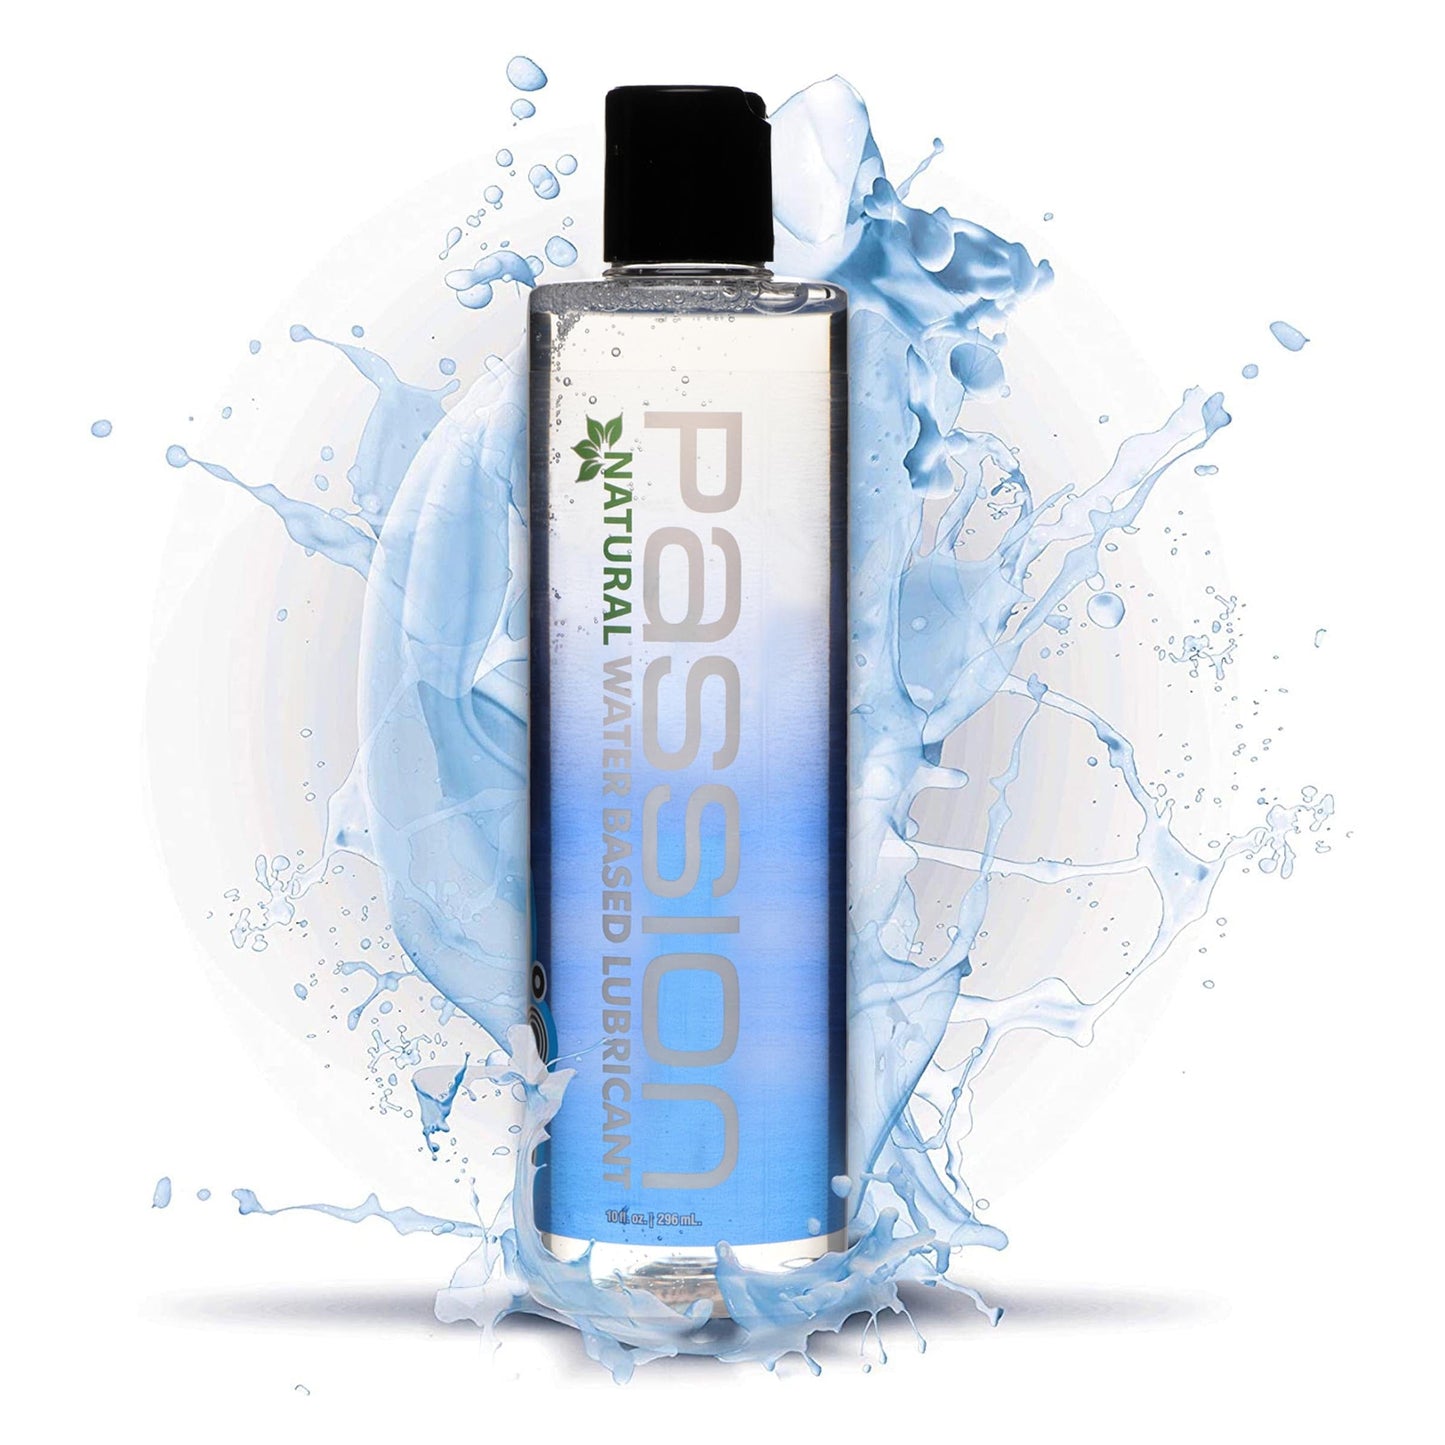 Passion Lubricants Lubricants 10 Oz Passion Water Based Lubricant at the Haus of Shag